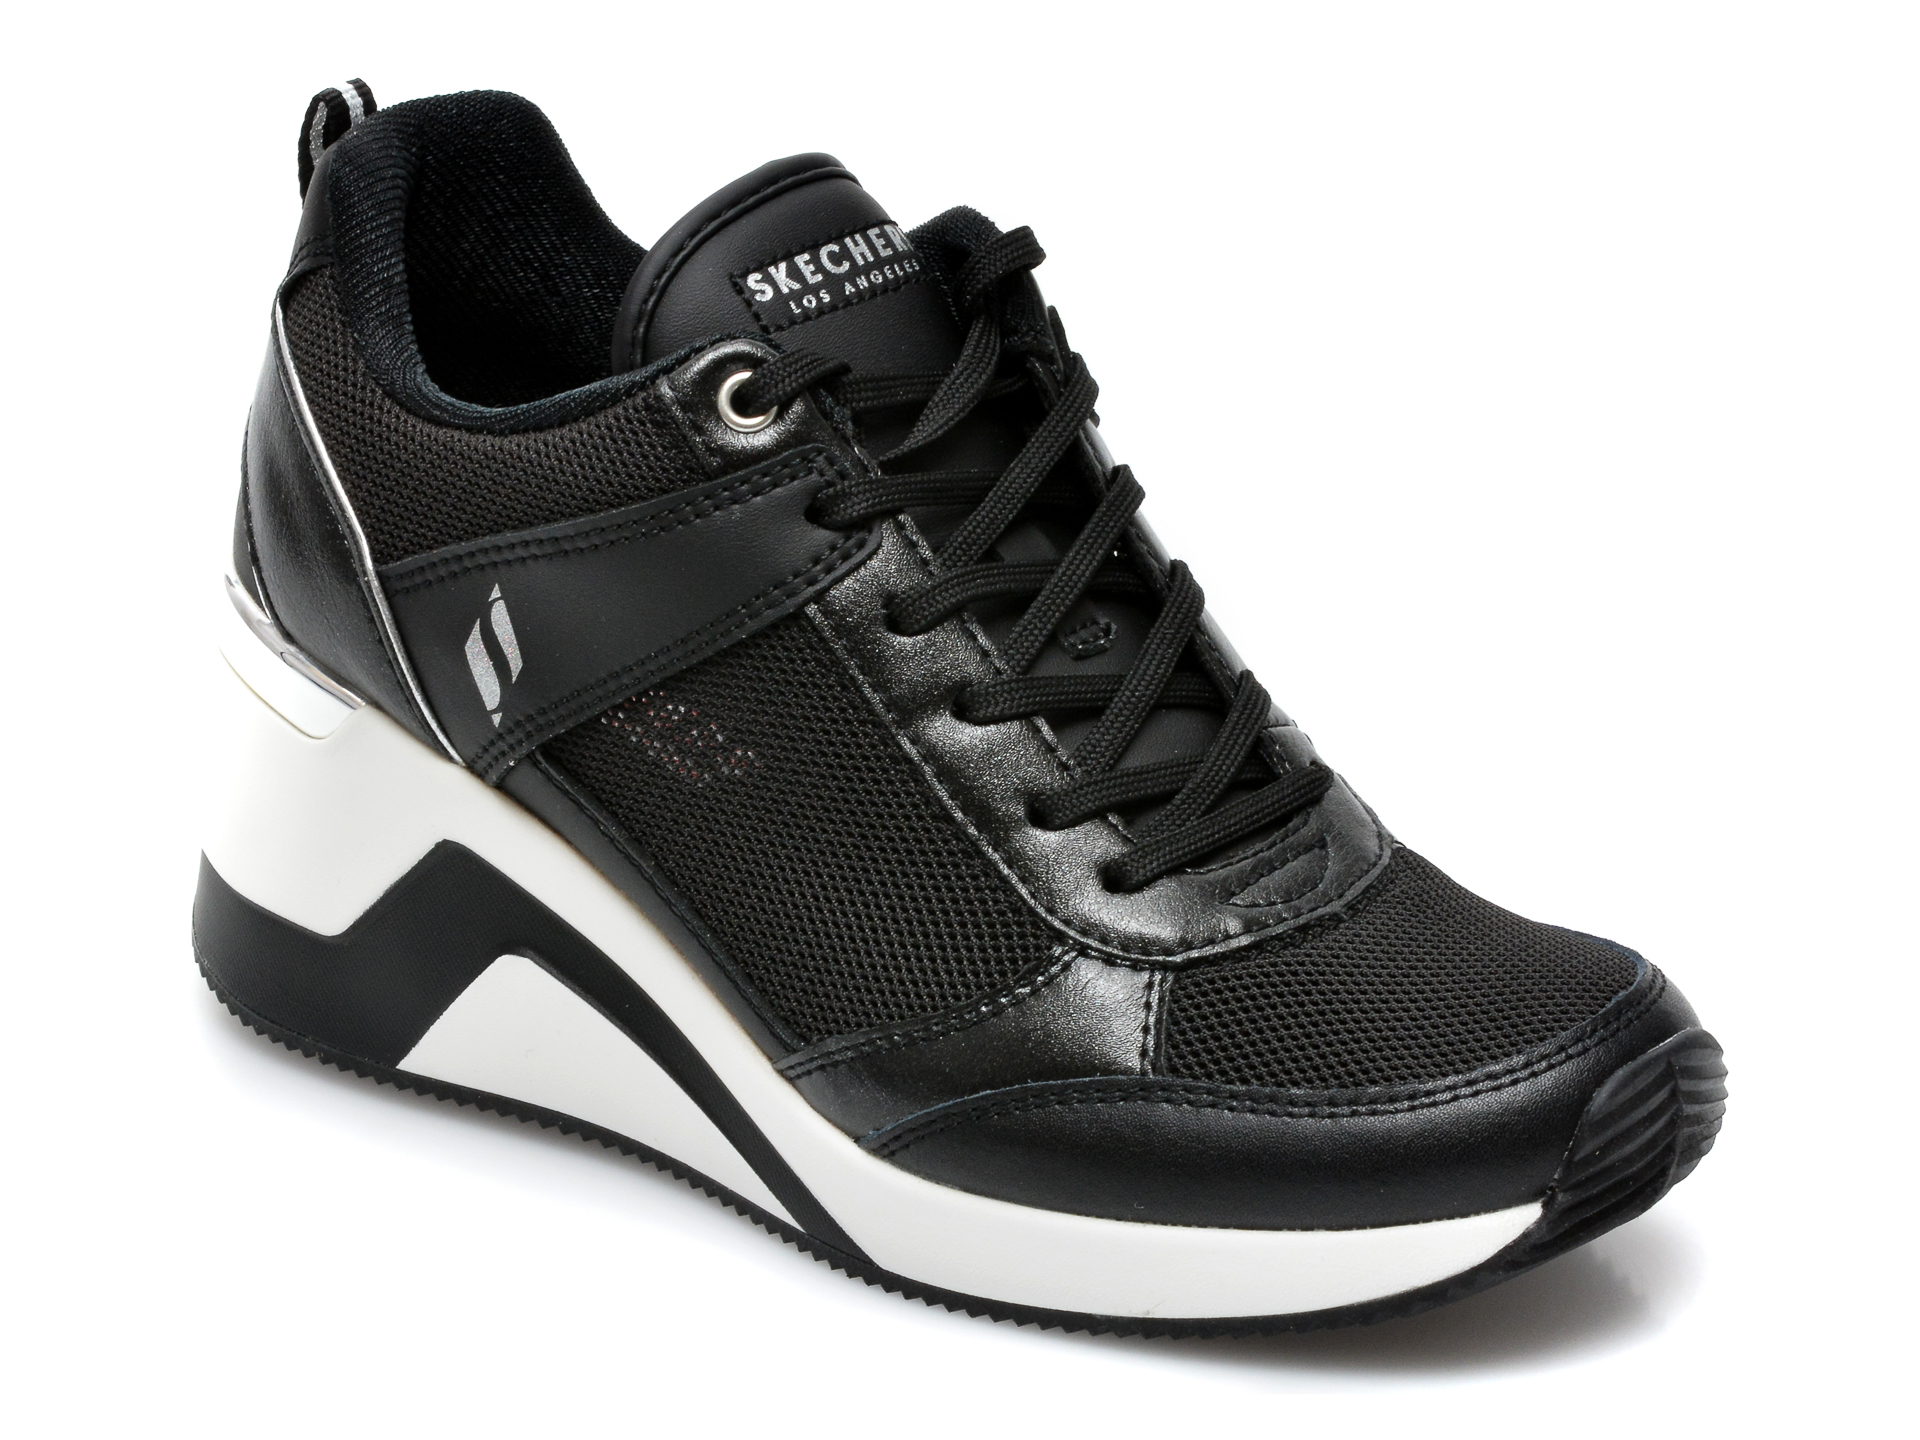 Pantofi sport SKECHERS negri, Million Air Up There, din material textil si piele ecologica otter.ro